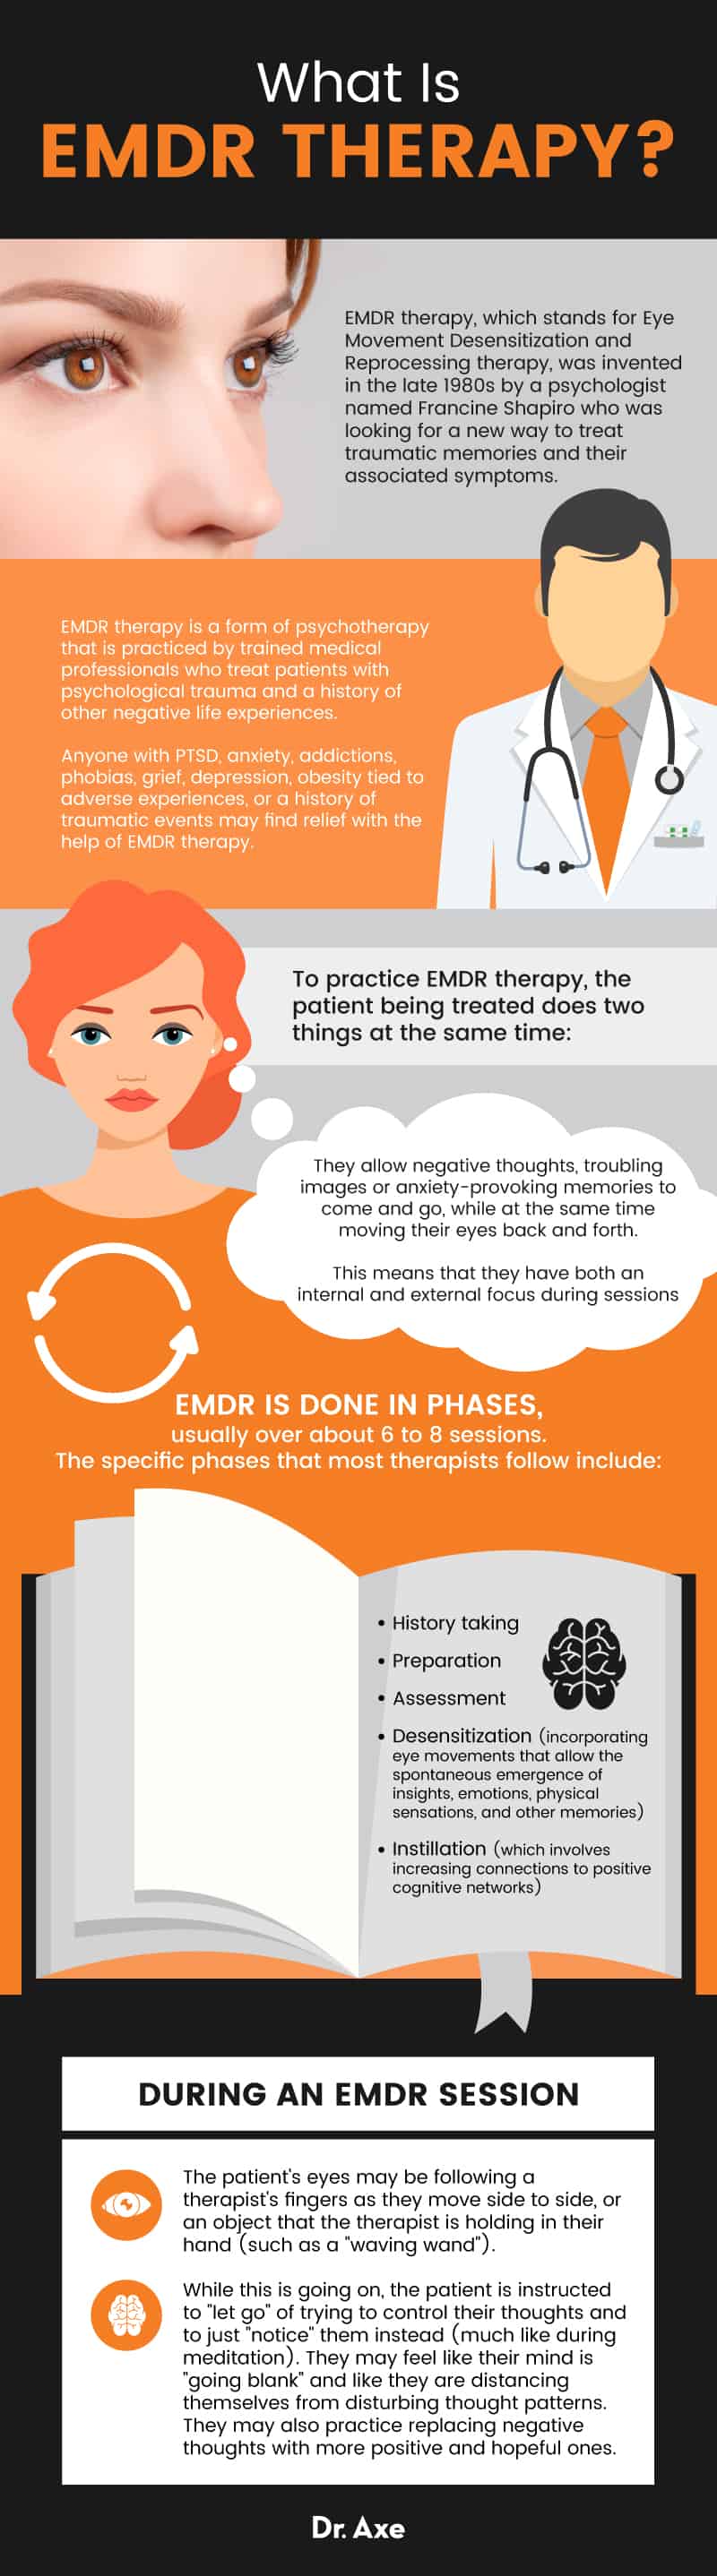 What is EMDR therapy? - Dr. Axe